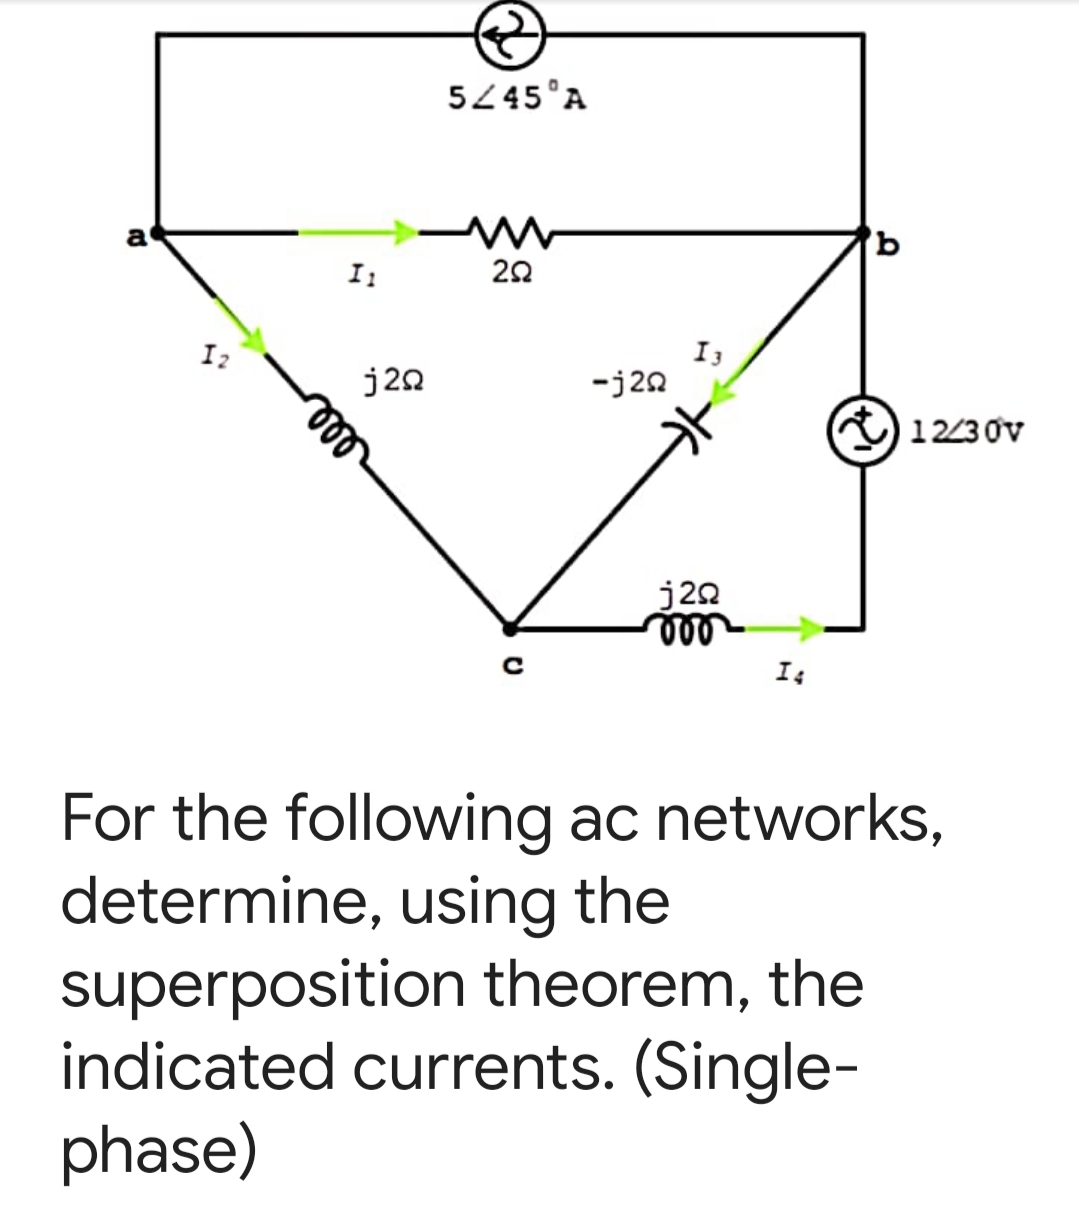 5445°A
a
I3
-j20
I2
j20
C1230v
j20
le
For the following ac networks,
determine, using the
superposition theorem, the
indicated currents. (Single-
phase)
le
